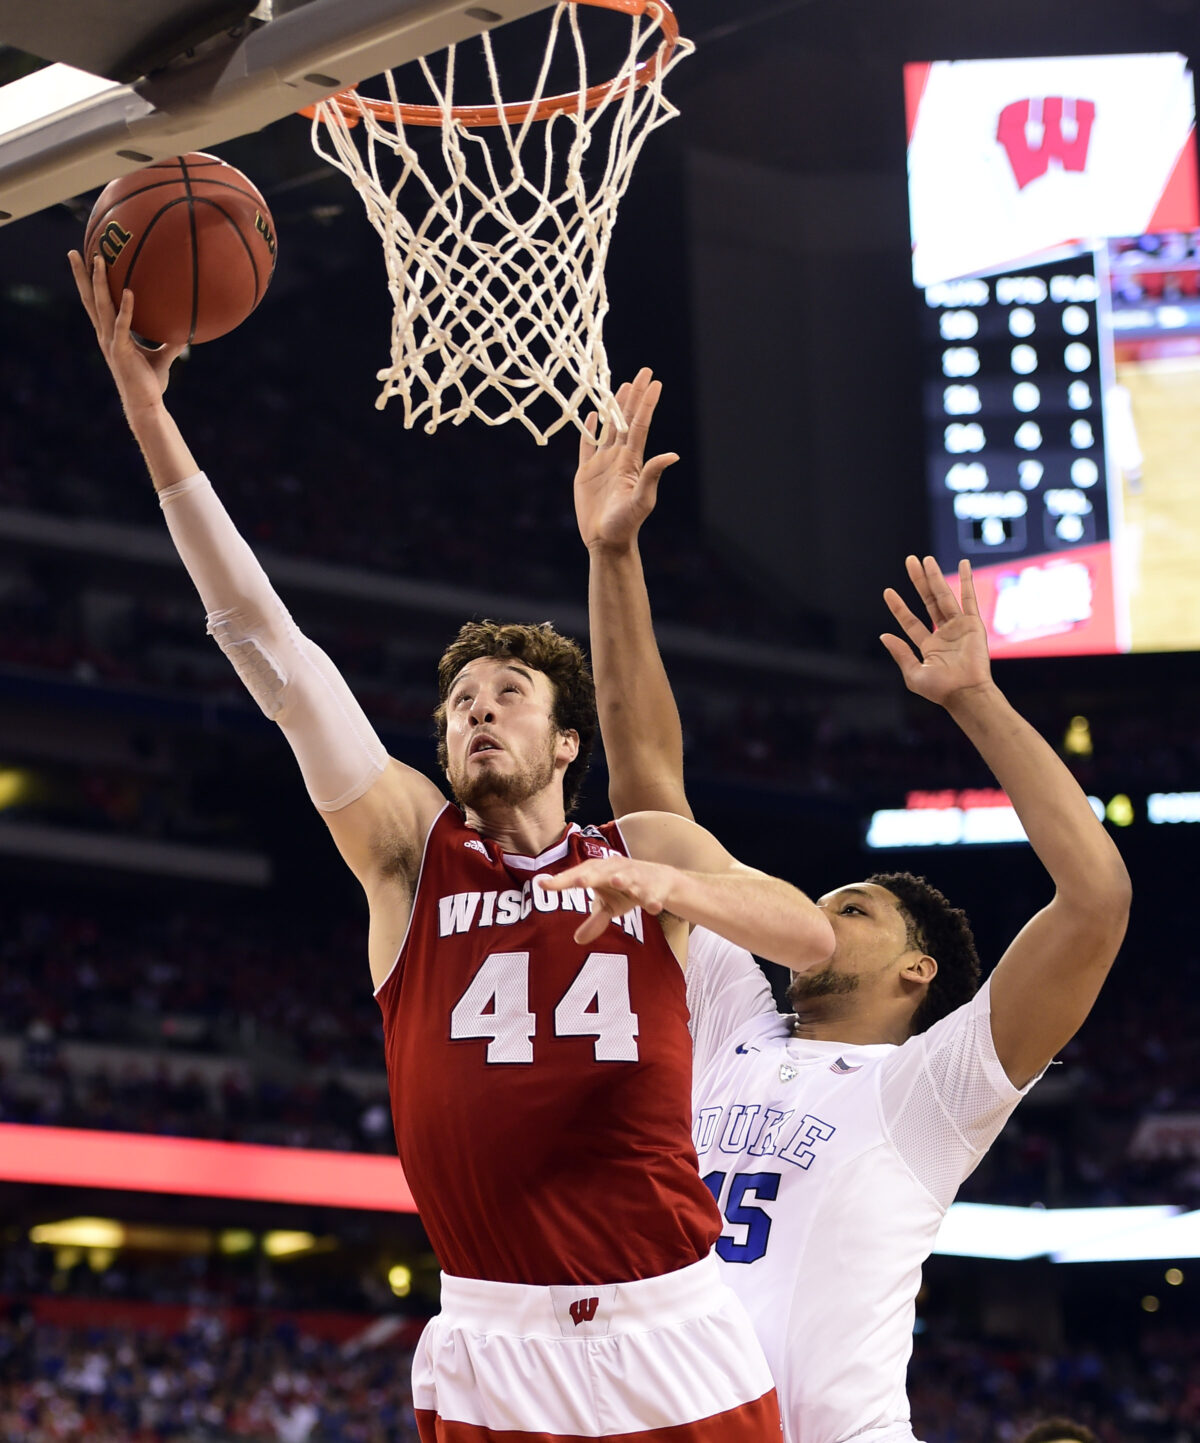 Every Wisconsin Badger selected in the NBA draft since 1980